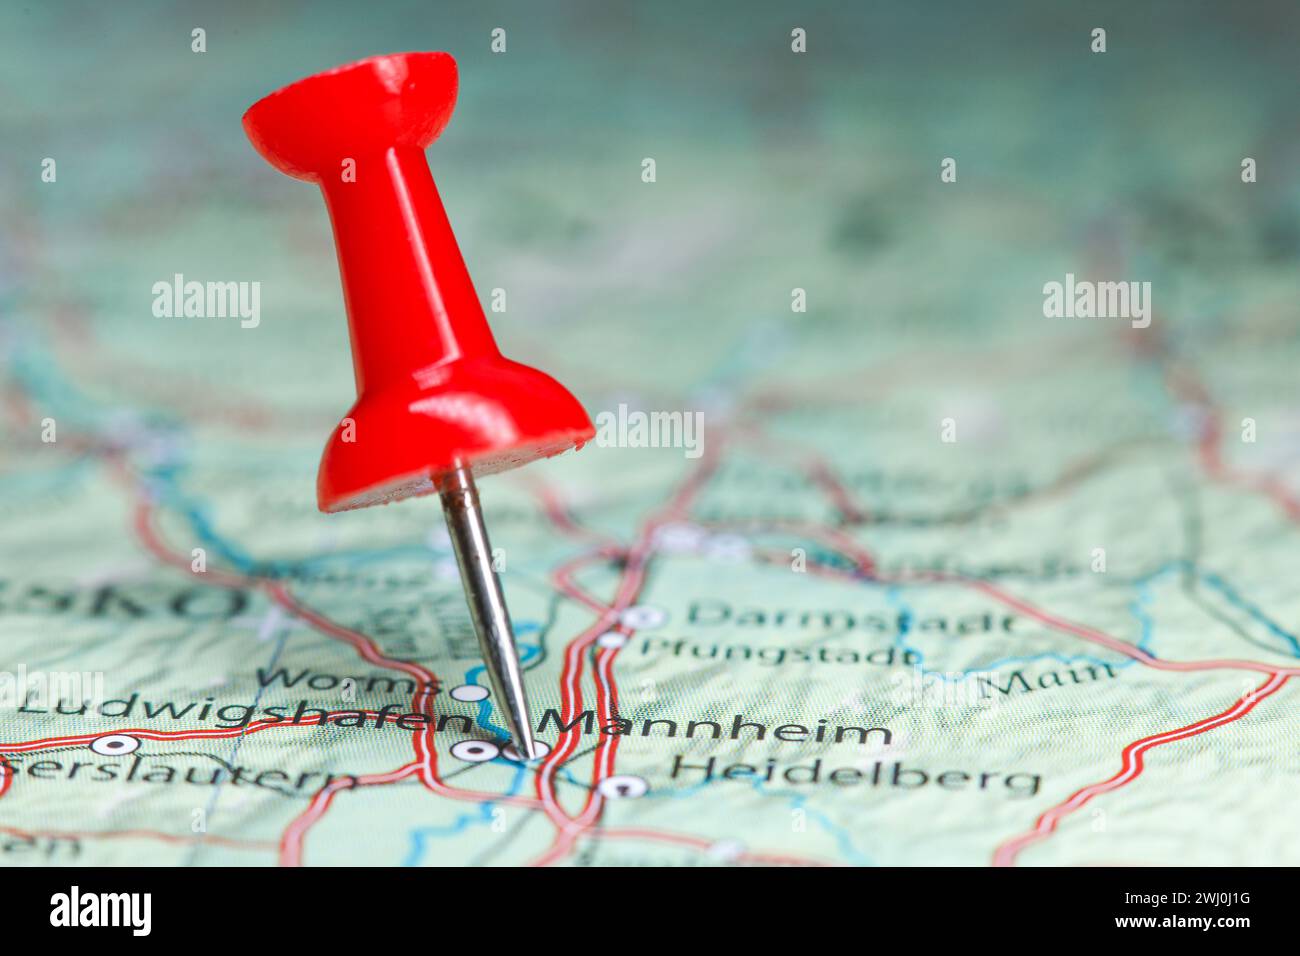 Mannheim pin on map of Germany Stock Photo